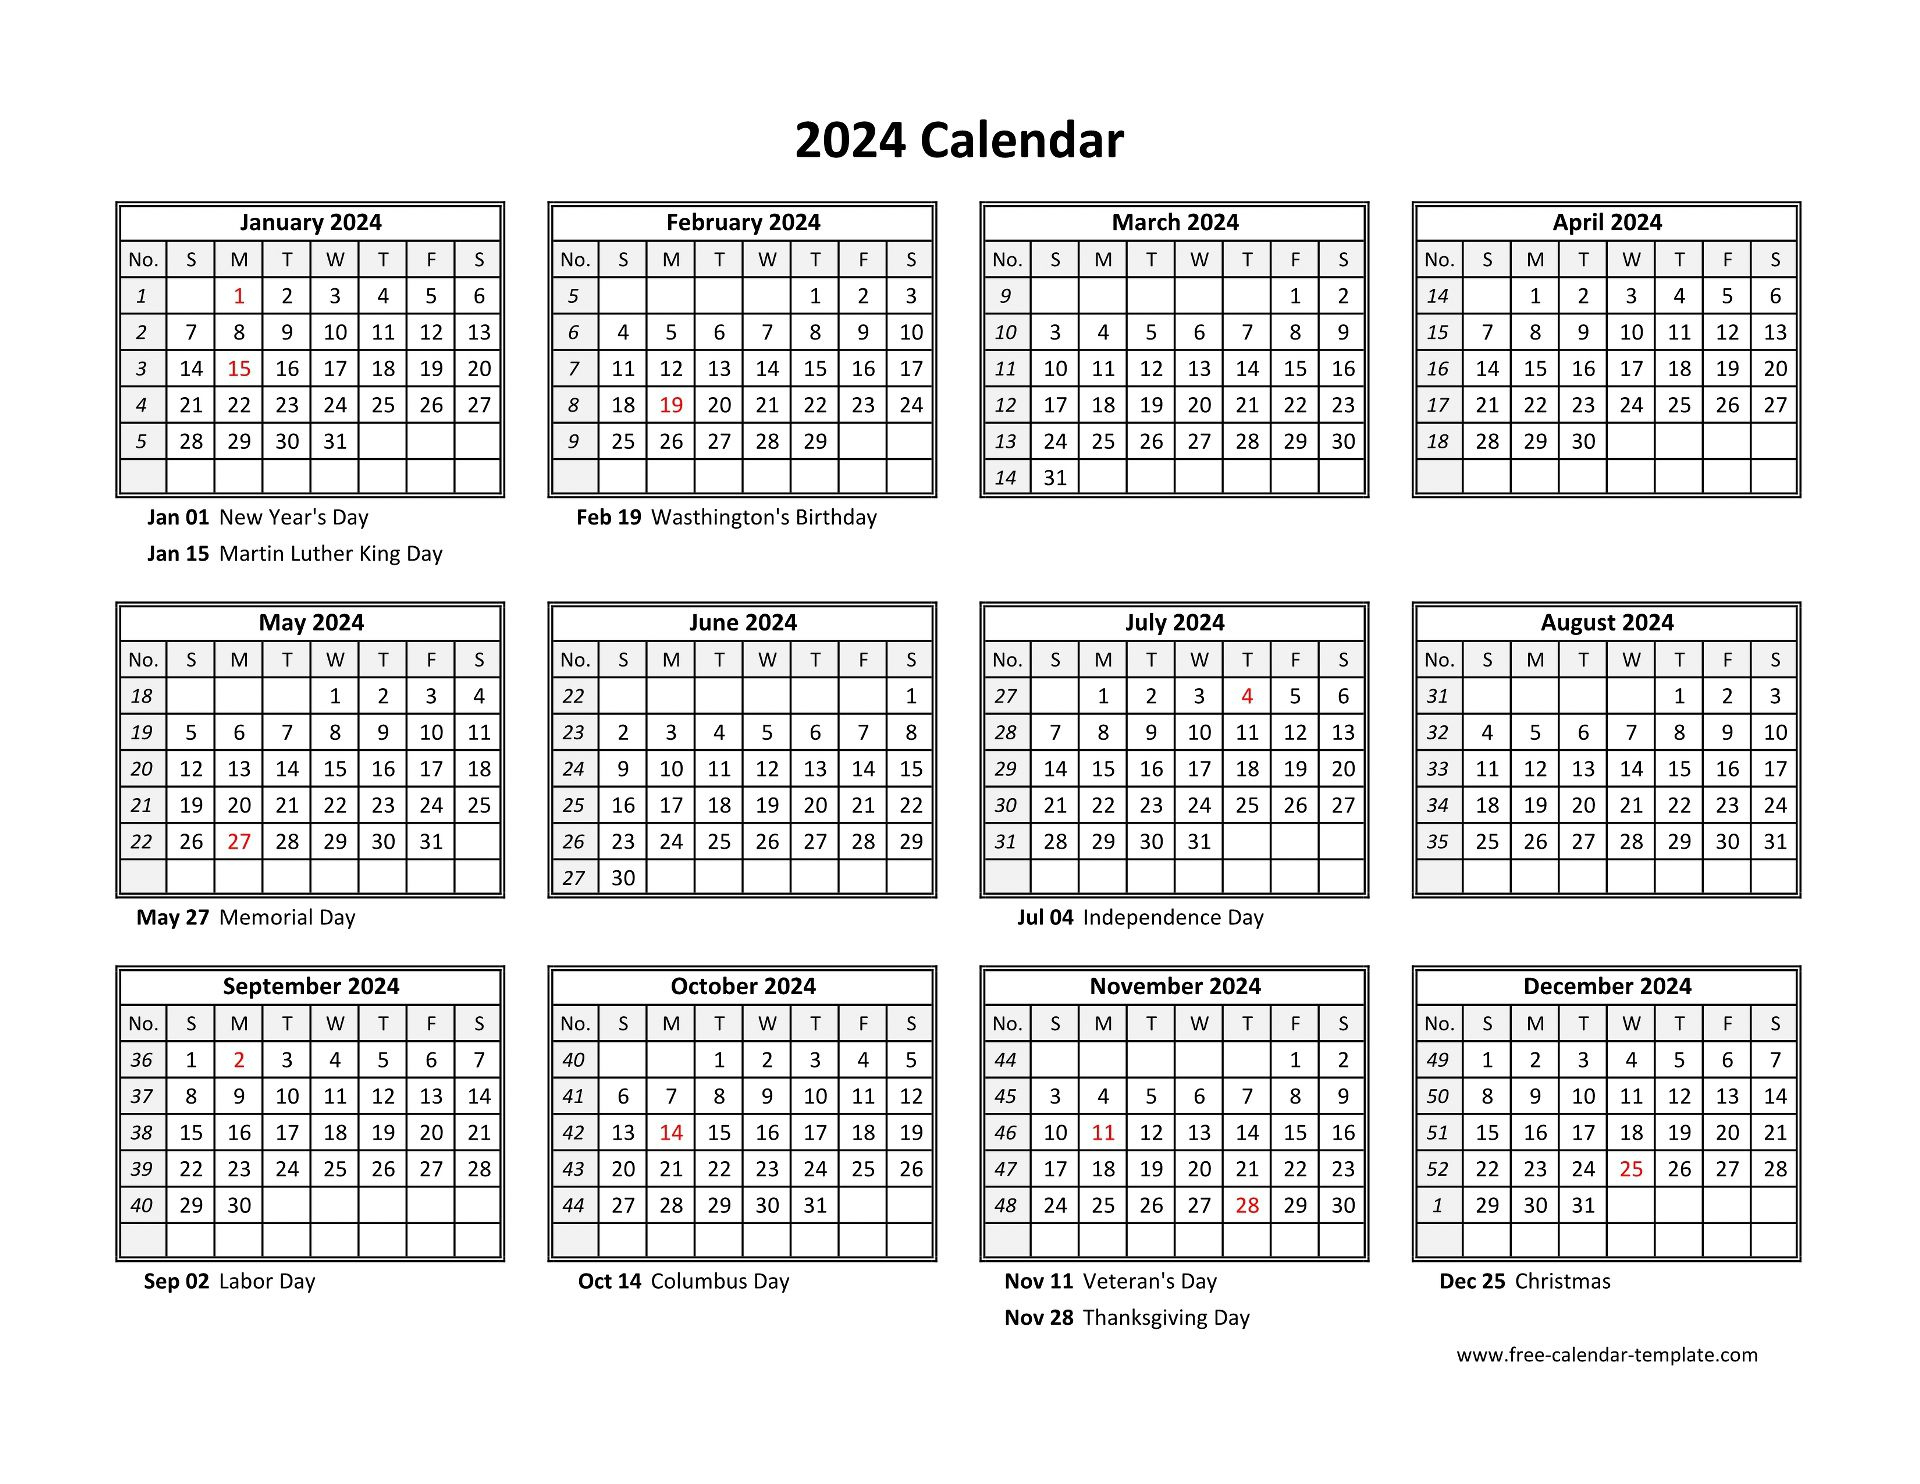 Yearly Calendar 2024 Printable With Federal Holidays | Free | 2024 Calendar Printable Free